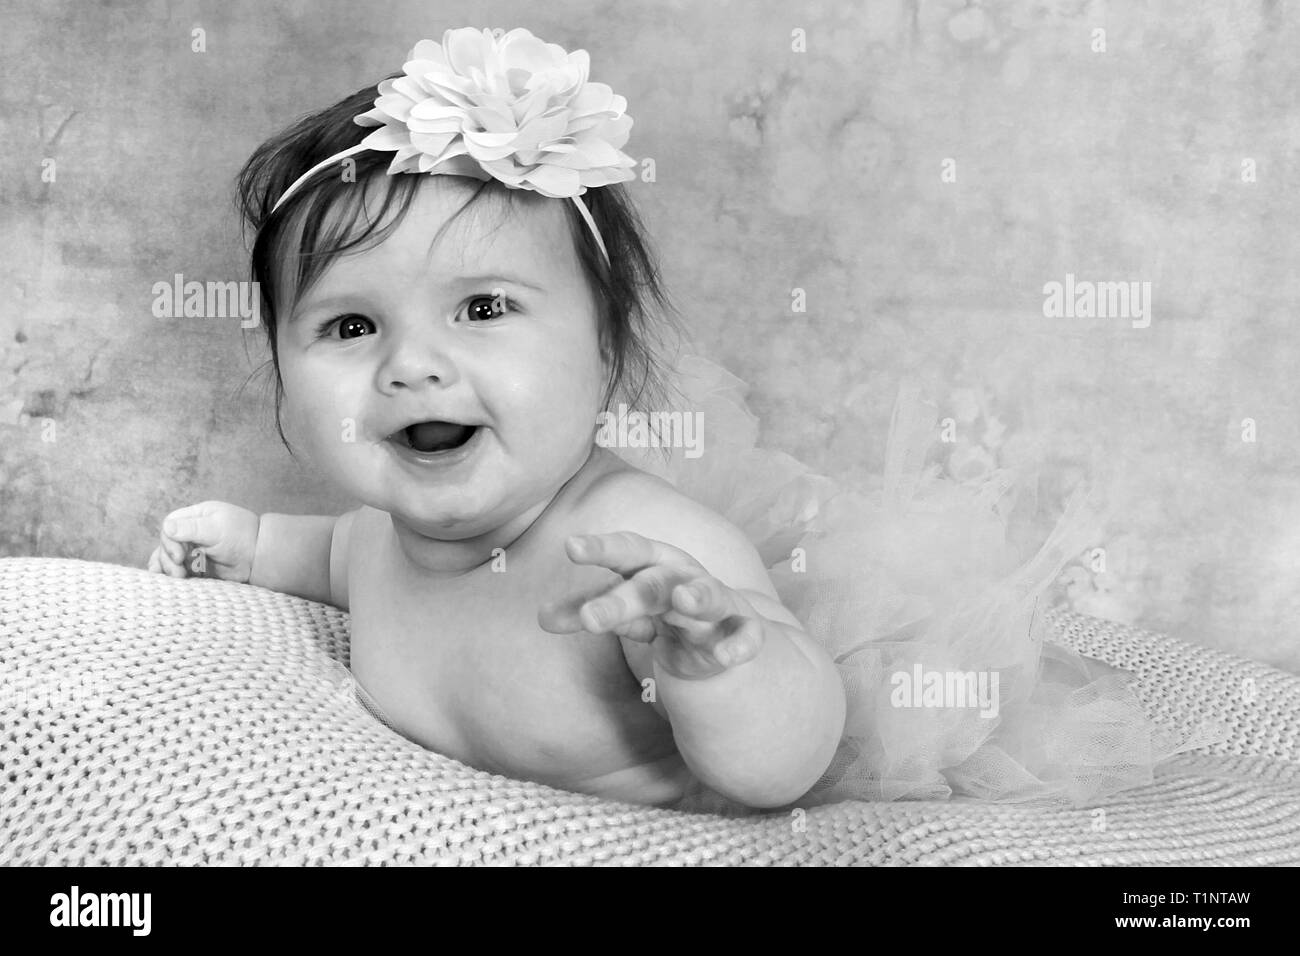 6 month old baby girl Stock Photo